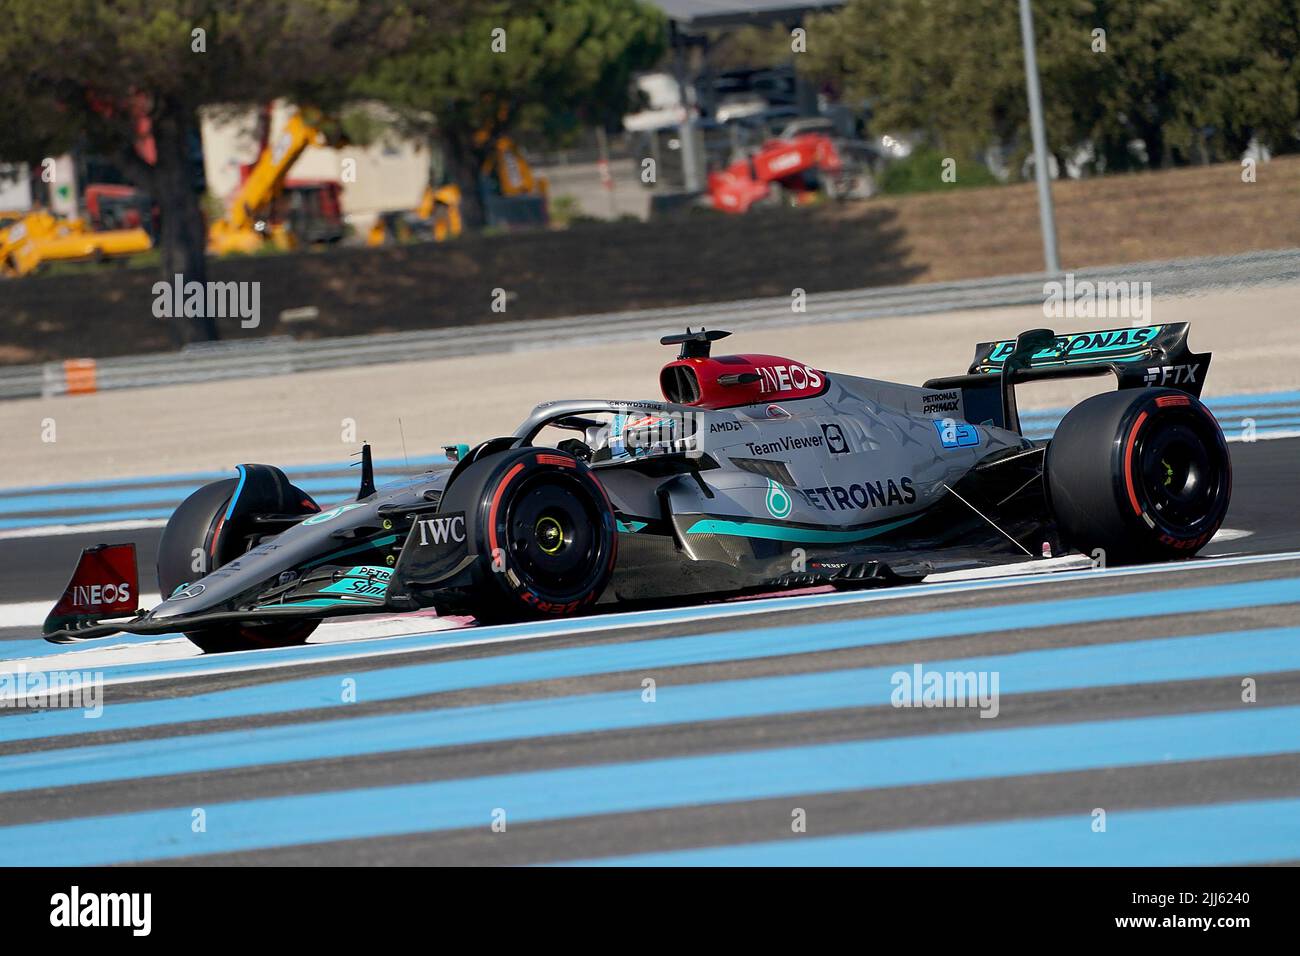 Le Castellet, France. 23rd July, 2022. Motorsport: Formula 1 World Championship, ahead of the French Grand Prix, qualifying: George Russell from Great Britain of Team Mercedes is on track. Credit: Hasan Bratic/dpa/Alamy Live News Stock Photo